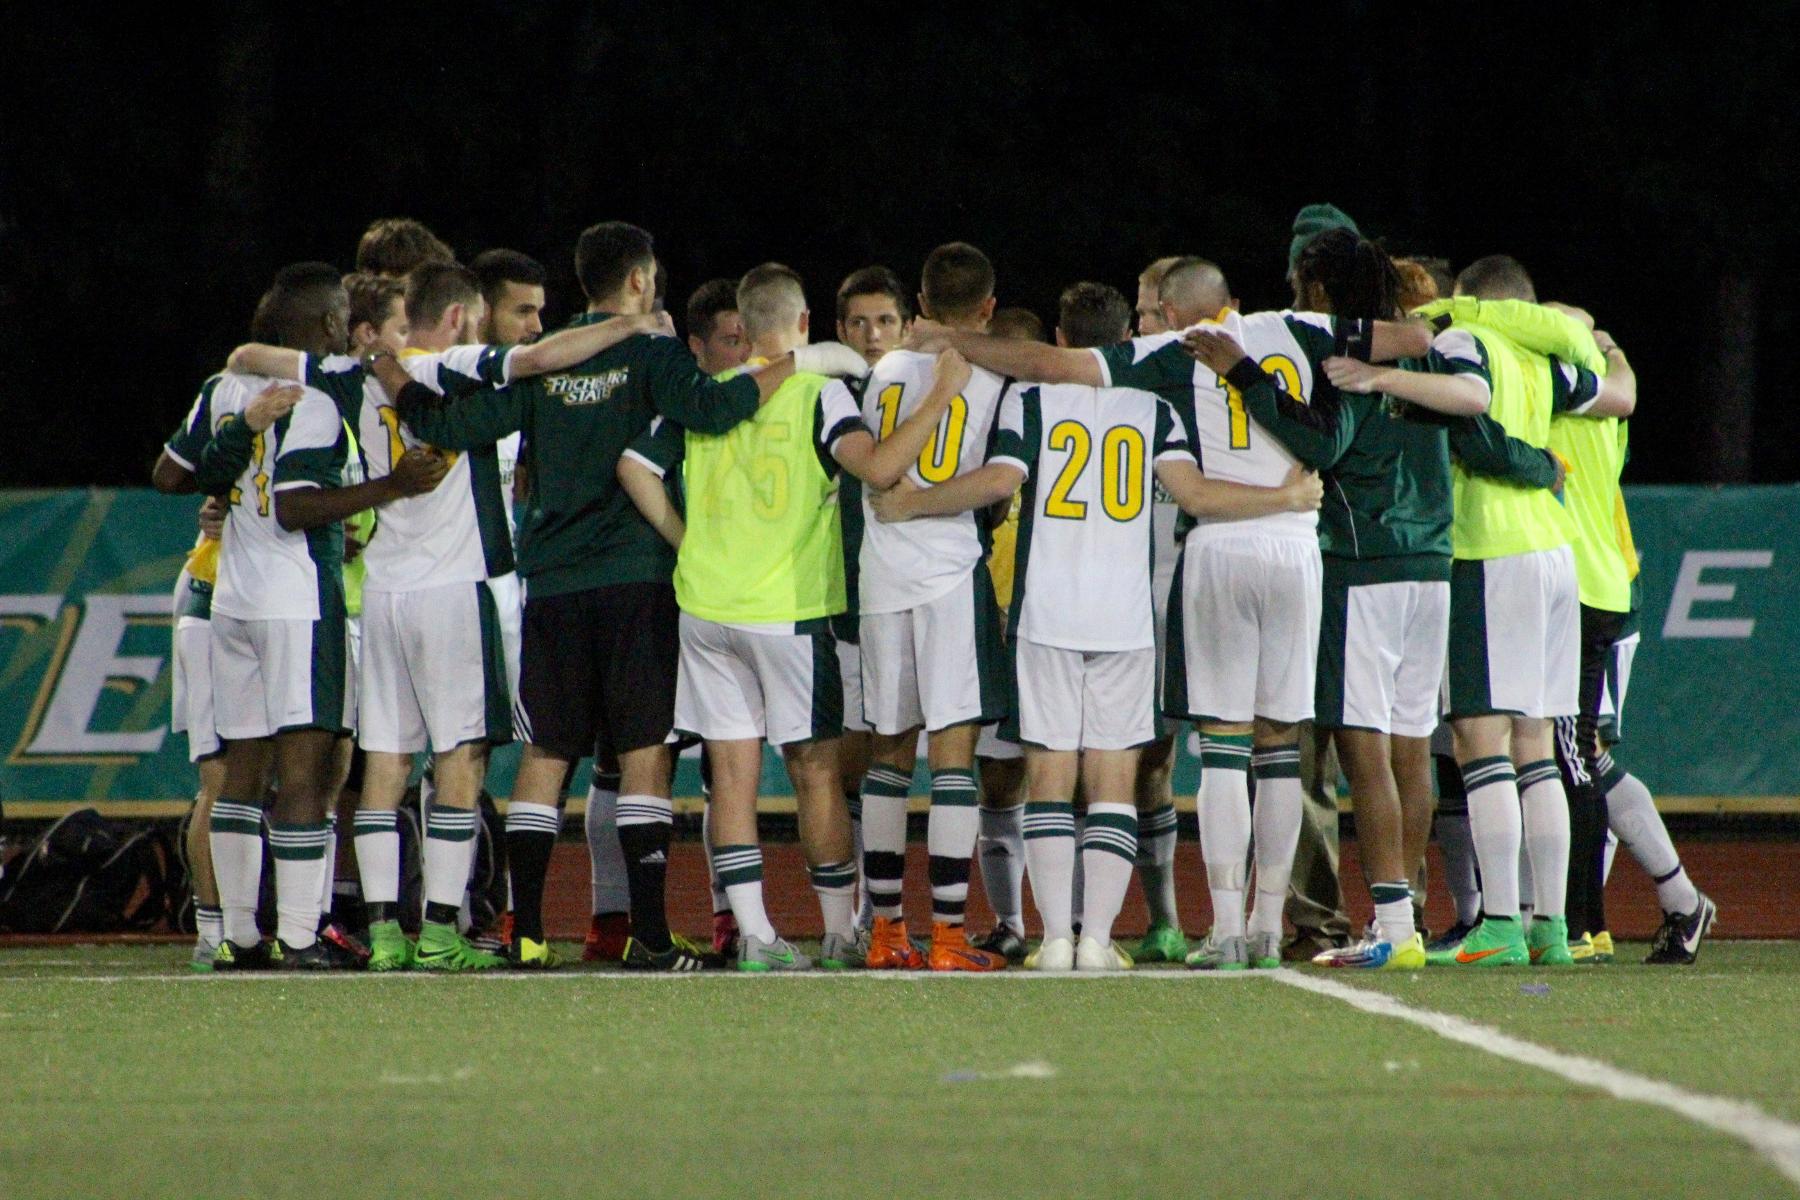 Men's Soccer Spring College Prospect Clinic to be Held on April 8th